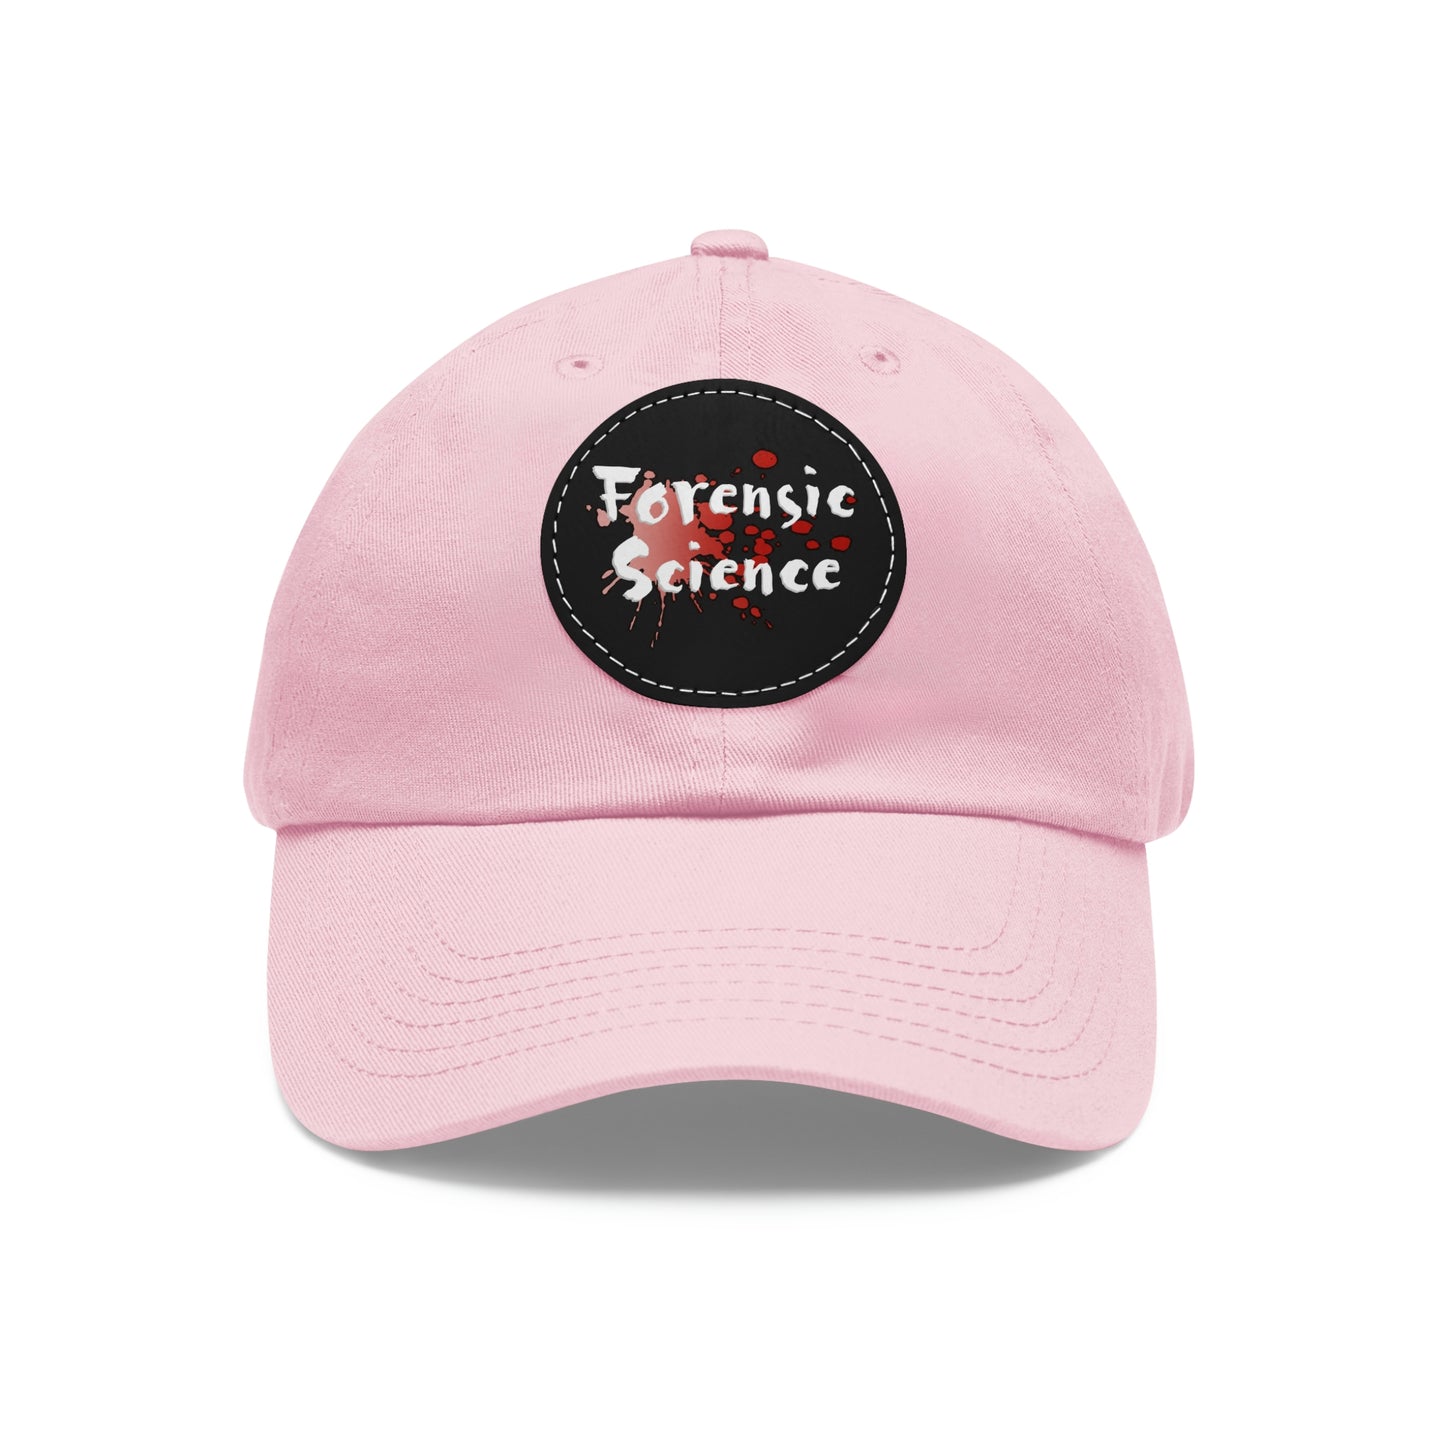 This forensic science hat is adjustable and has a leather patch which are made from 100% bio-washed chino twill. It's a very comfortable yet sturdy material that will last for ages.